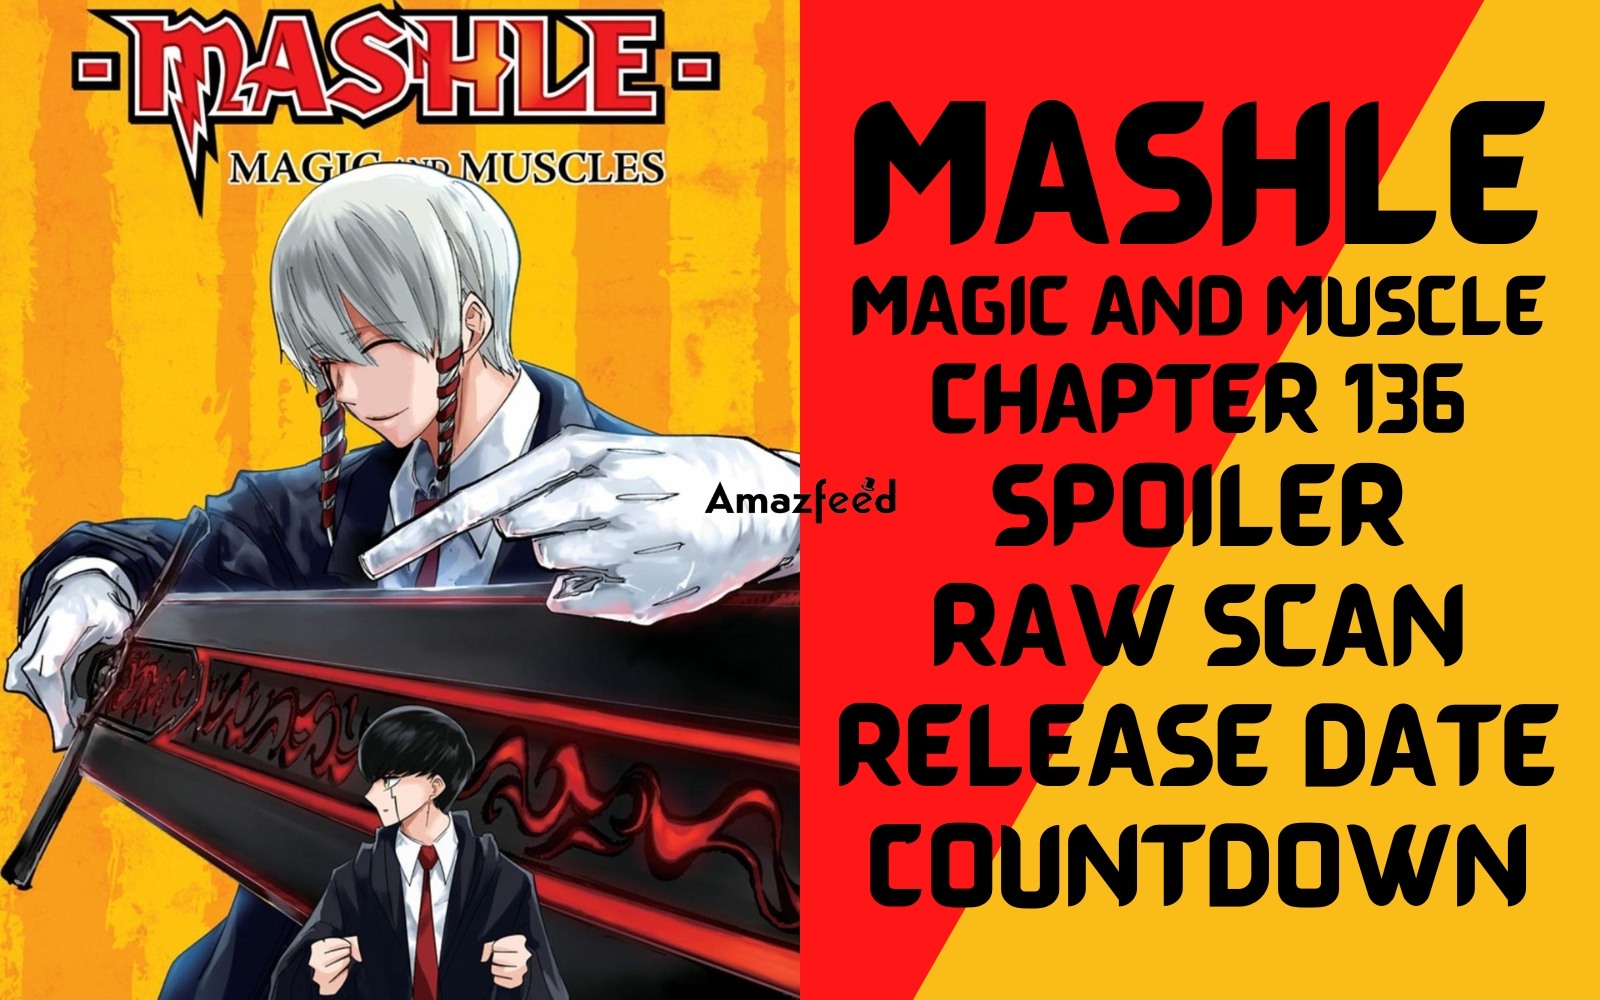 Mashle anime: Release date and time, countdown, where to watch